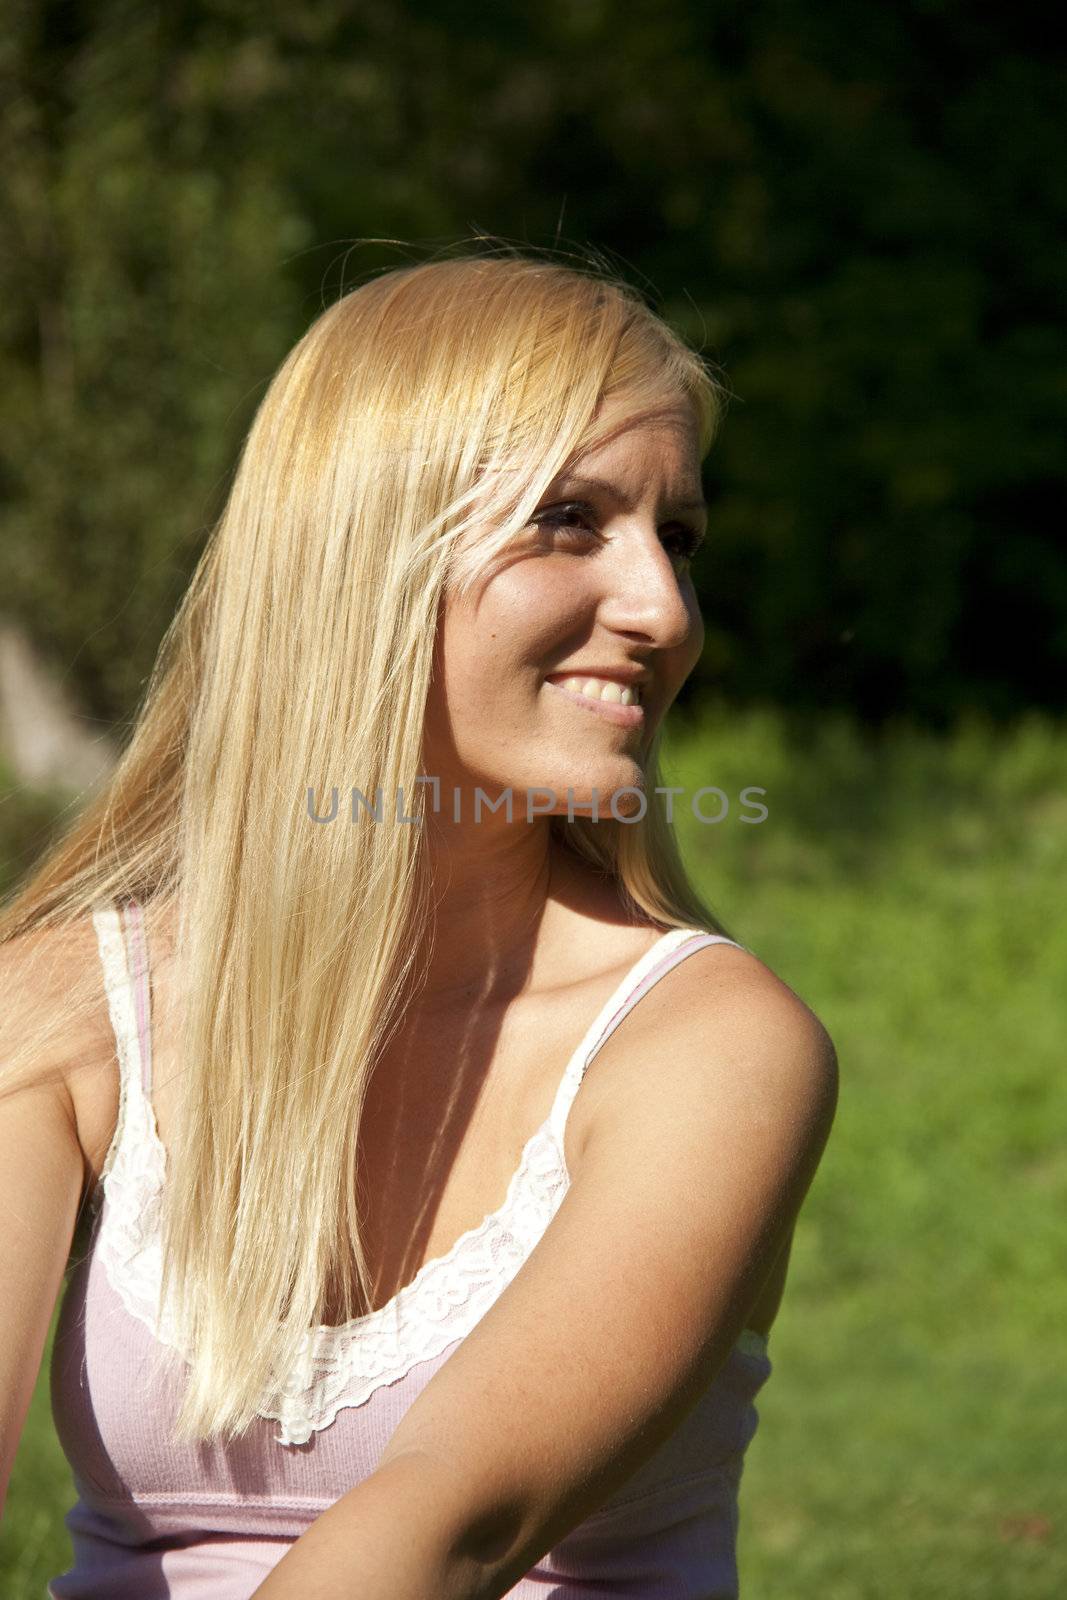 Beautiful blond woman resting in green environment